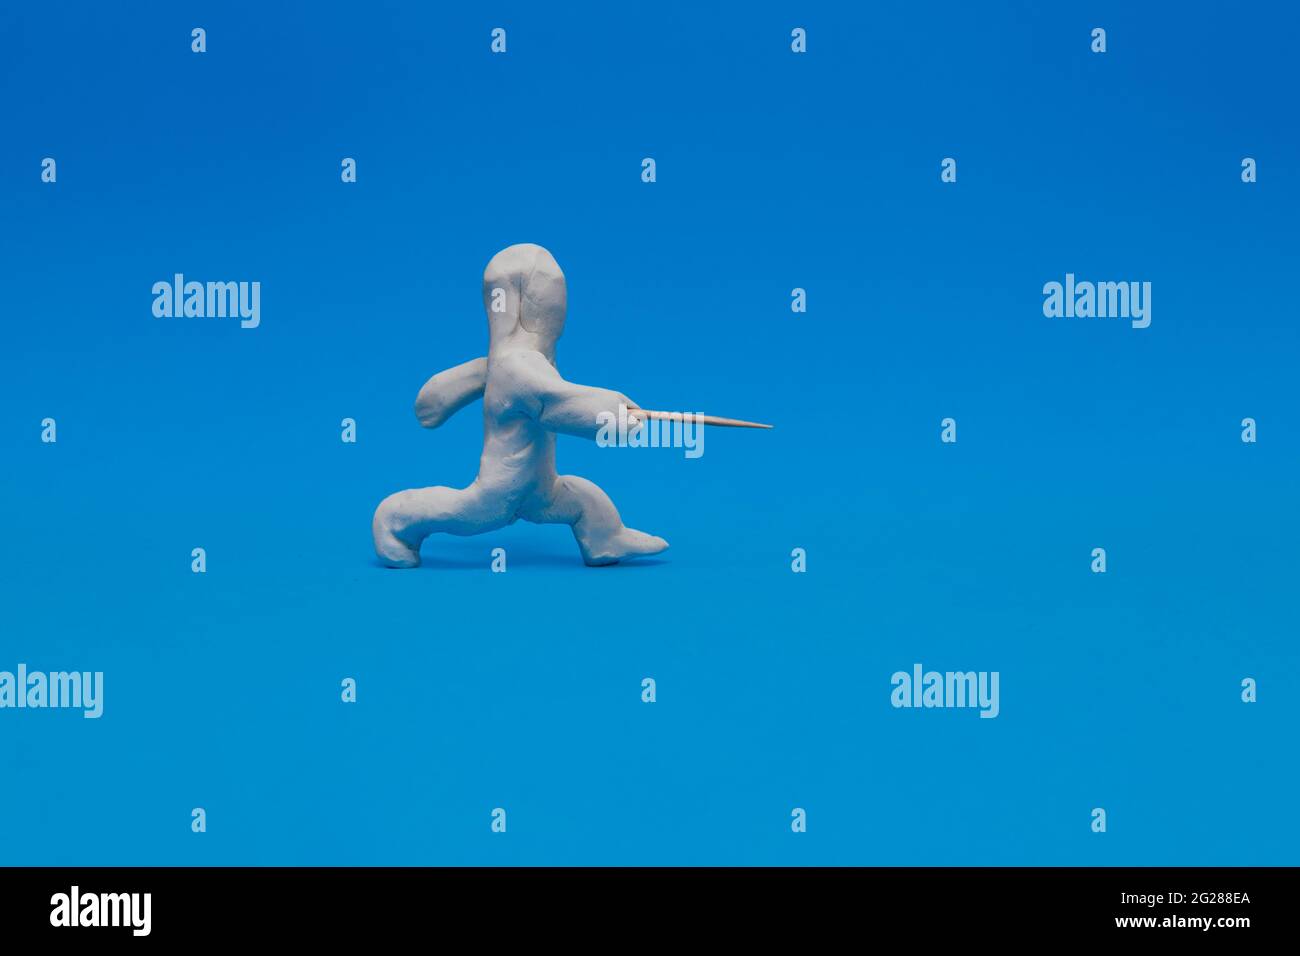 White plasticine dummy practicing fencing on a blue background. The dummy is making a thrust with his foil. Stock Photo